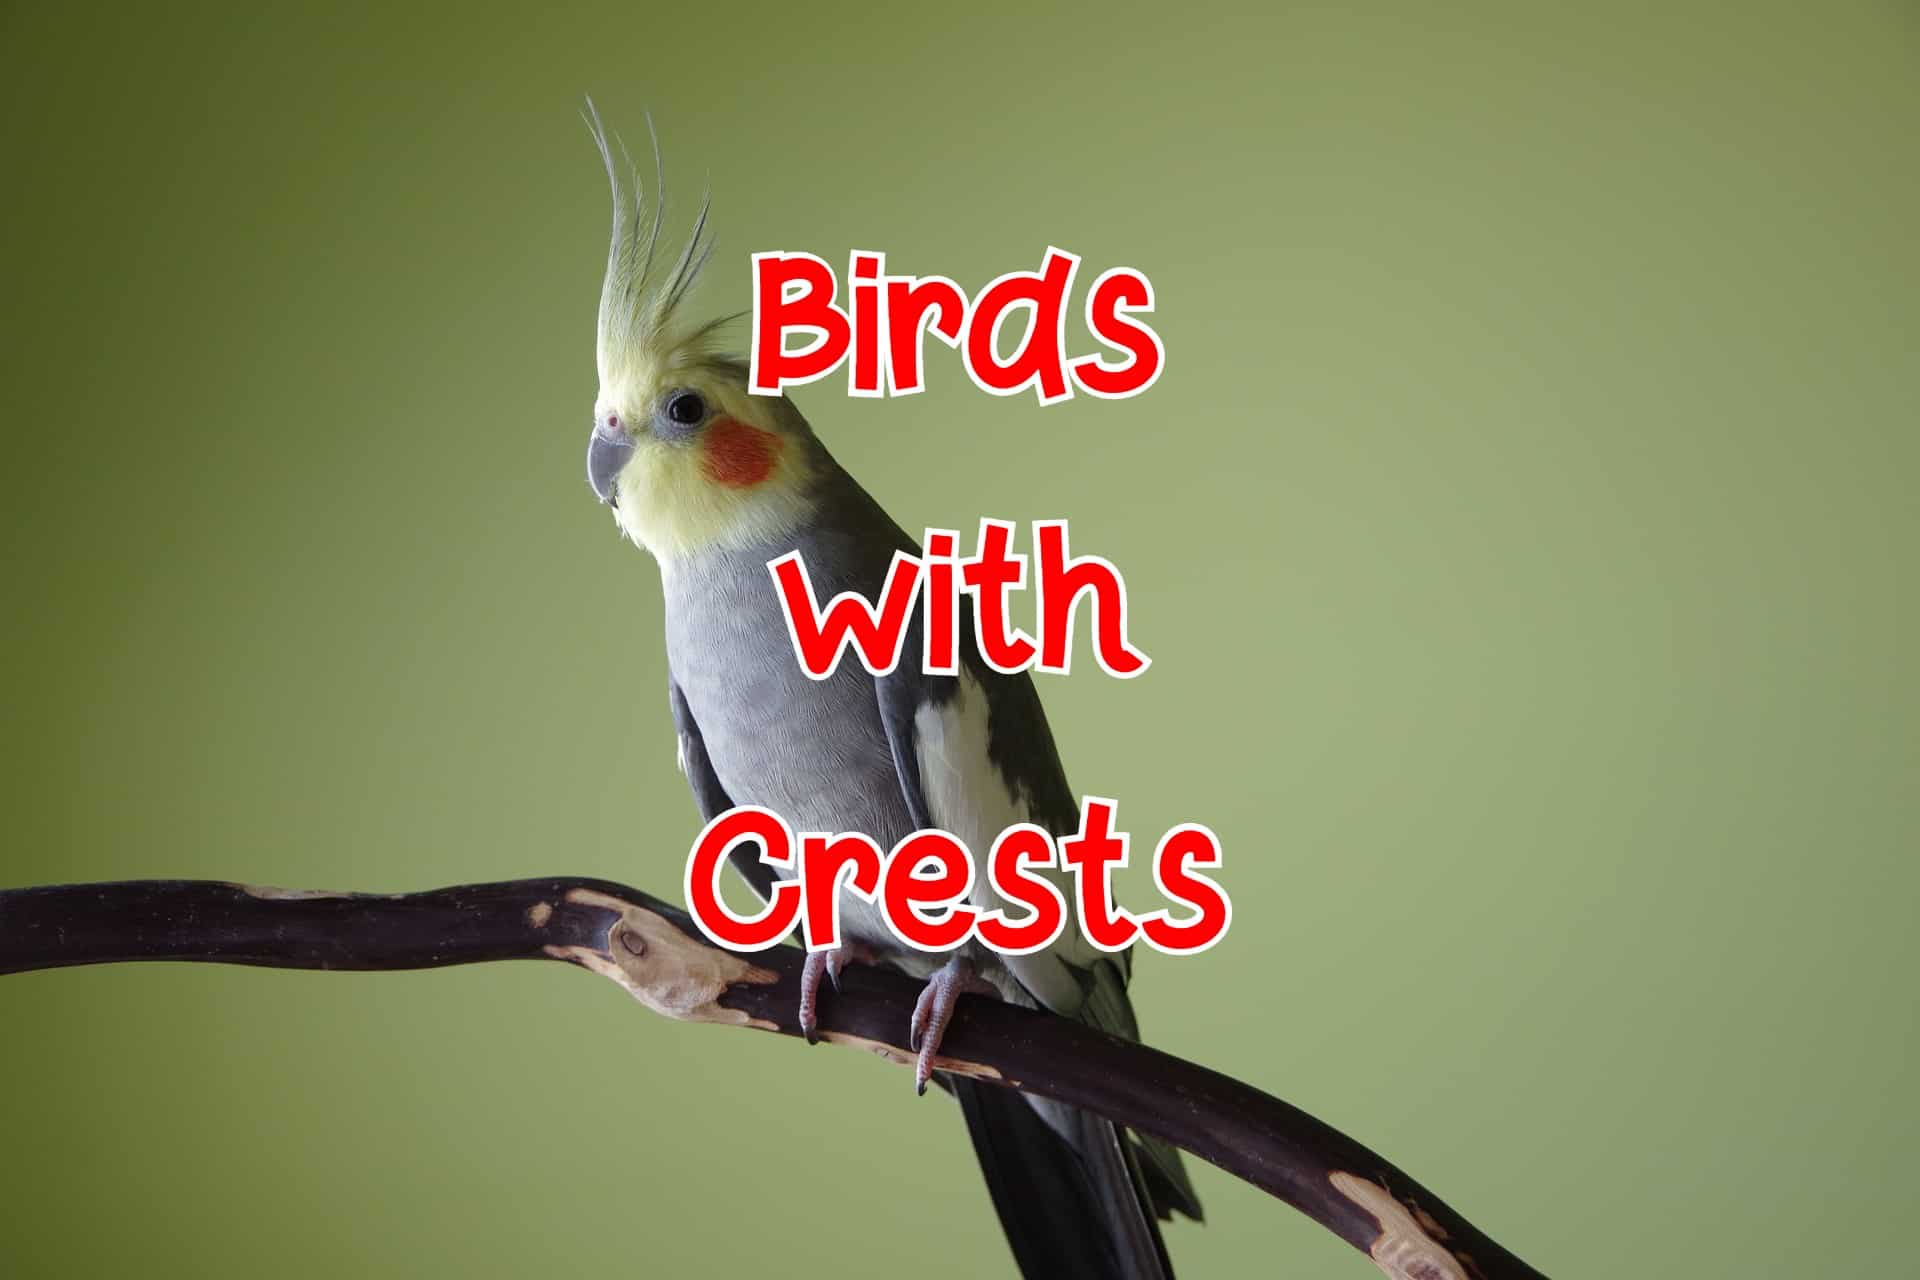 40 Birds With Crests (Tufted Heads) (Pictures and Identification)